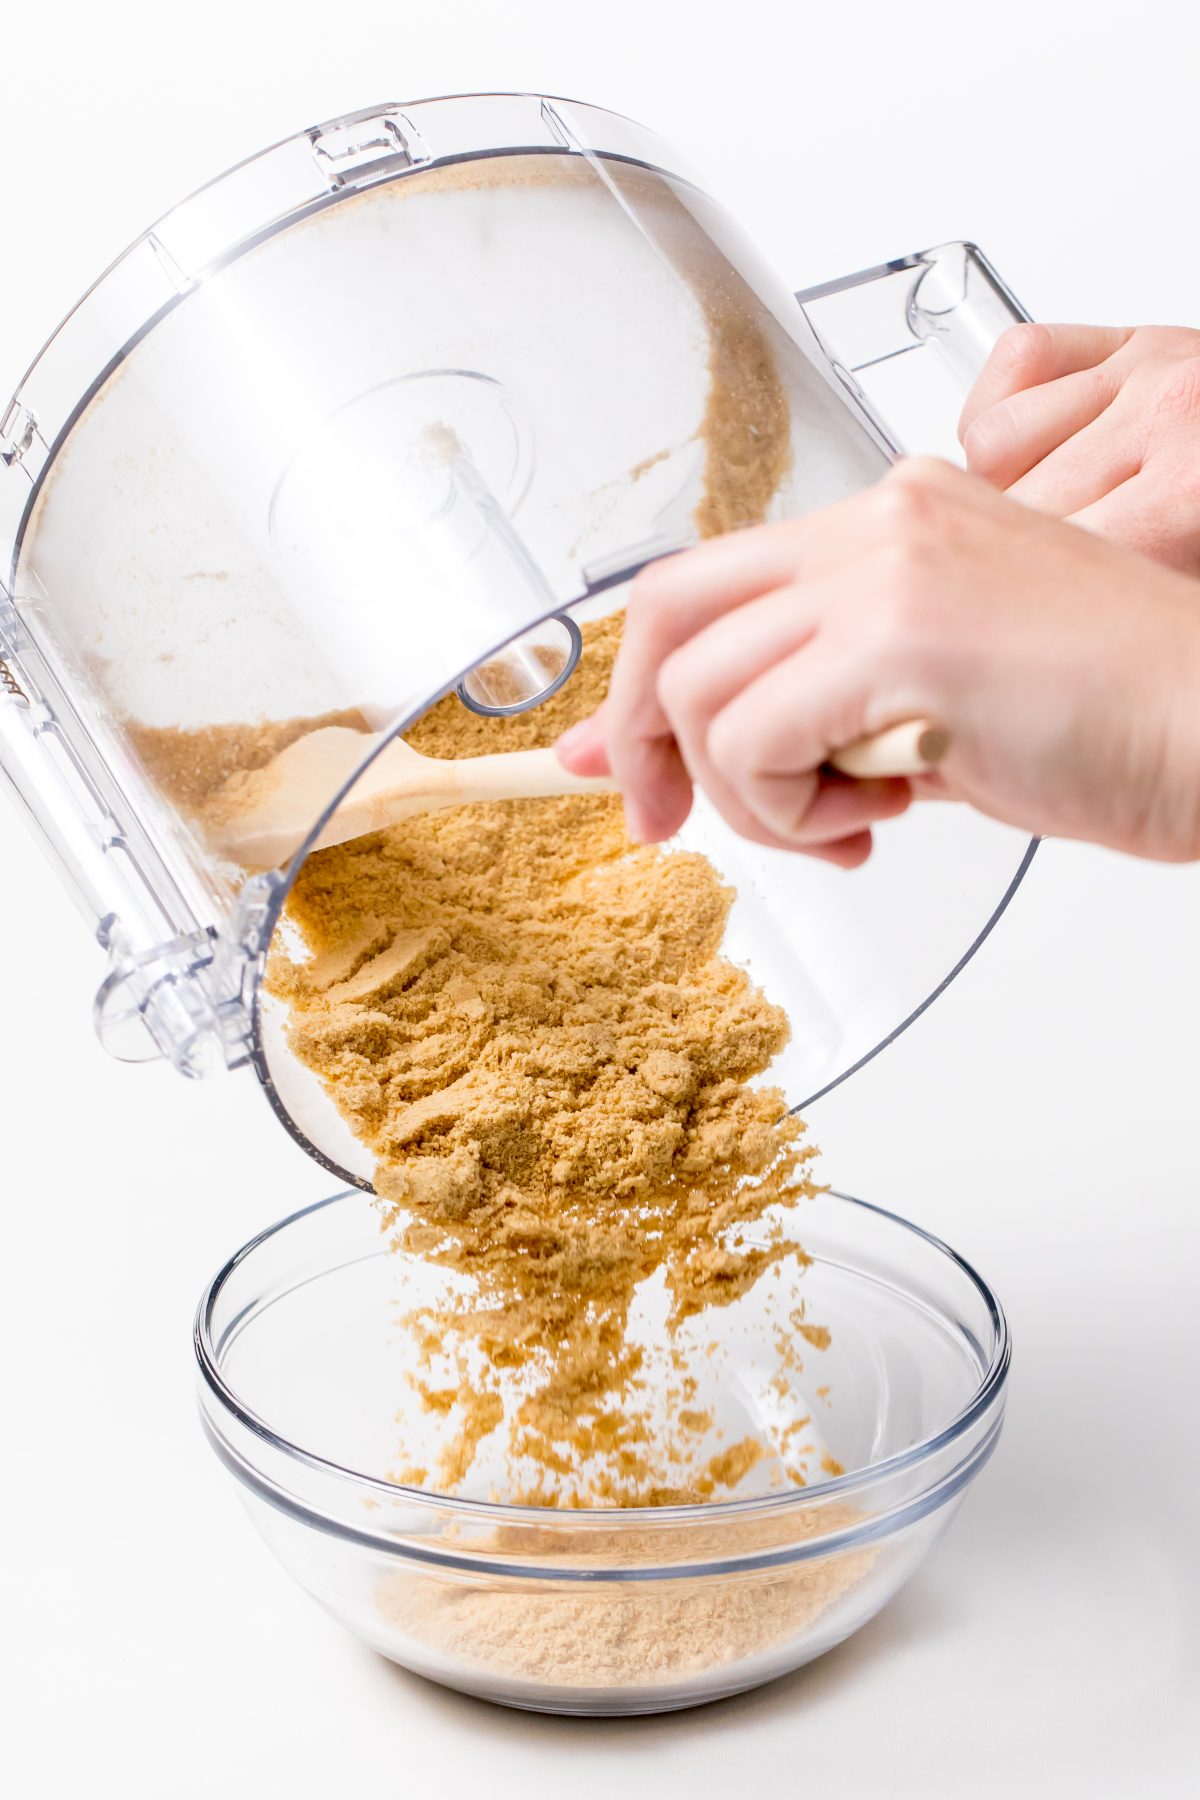 Use a food processor to finely grind graham crackers